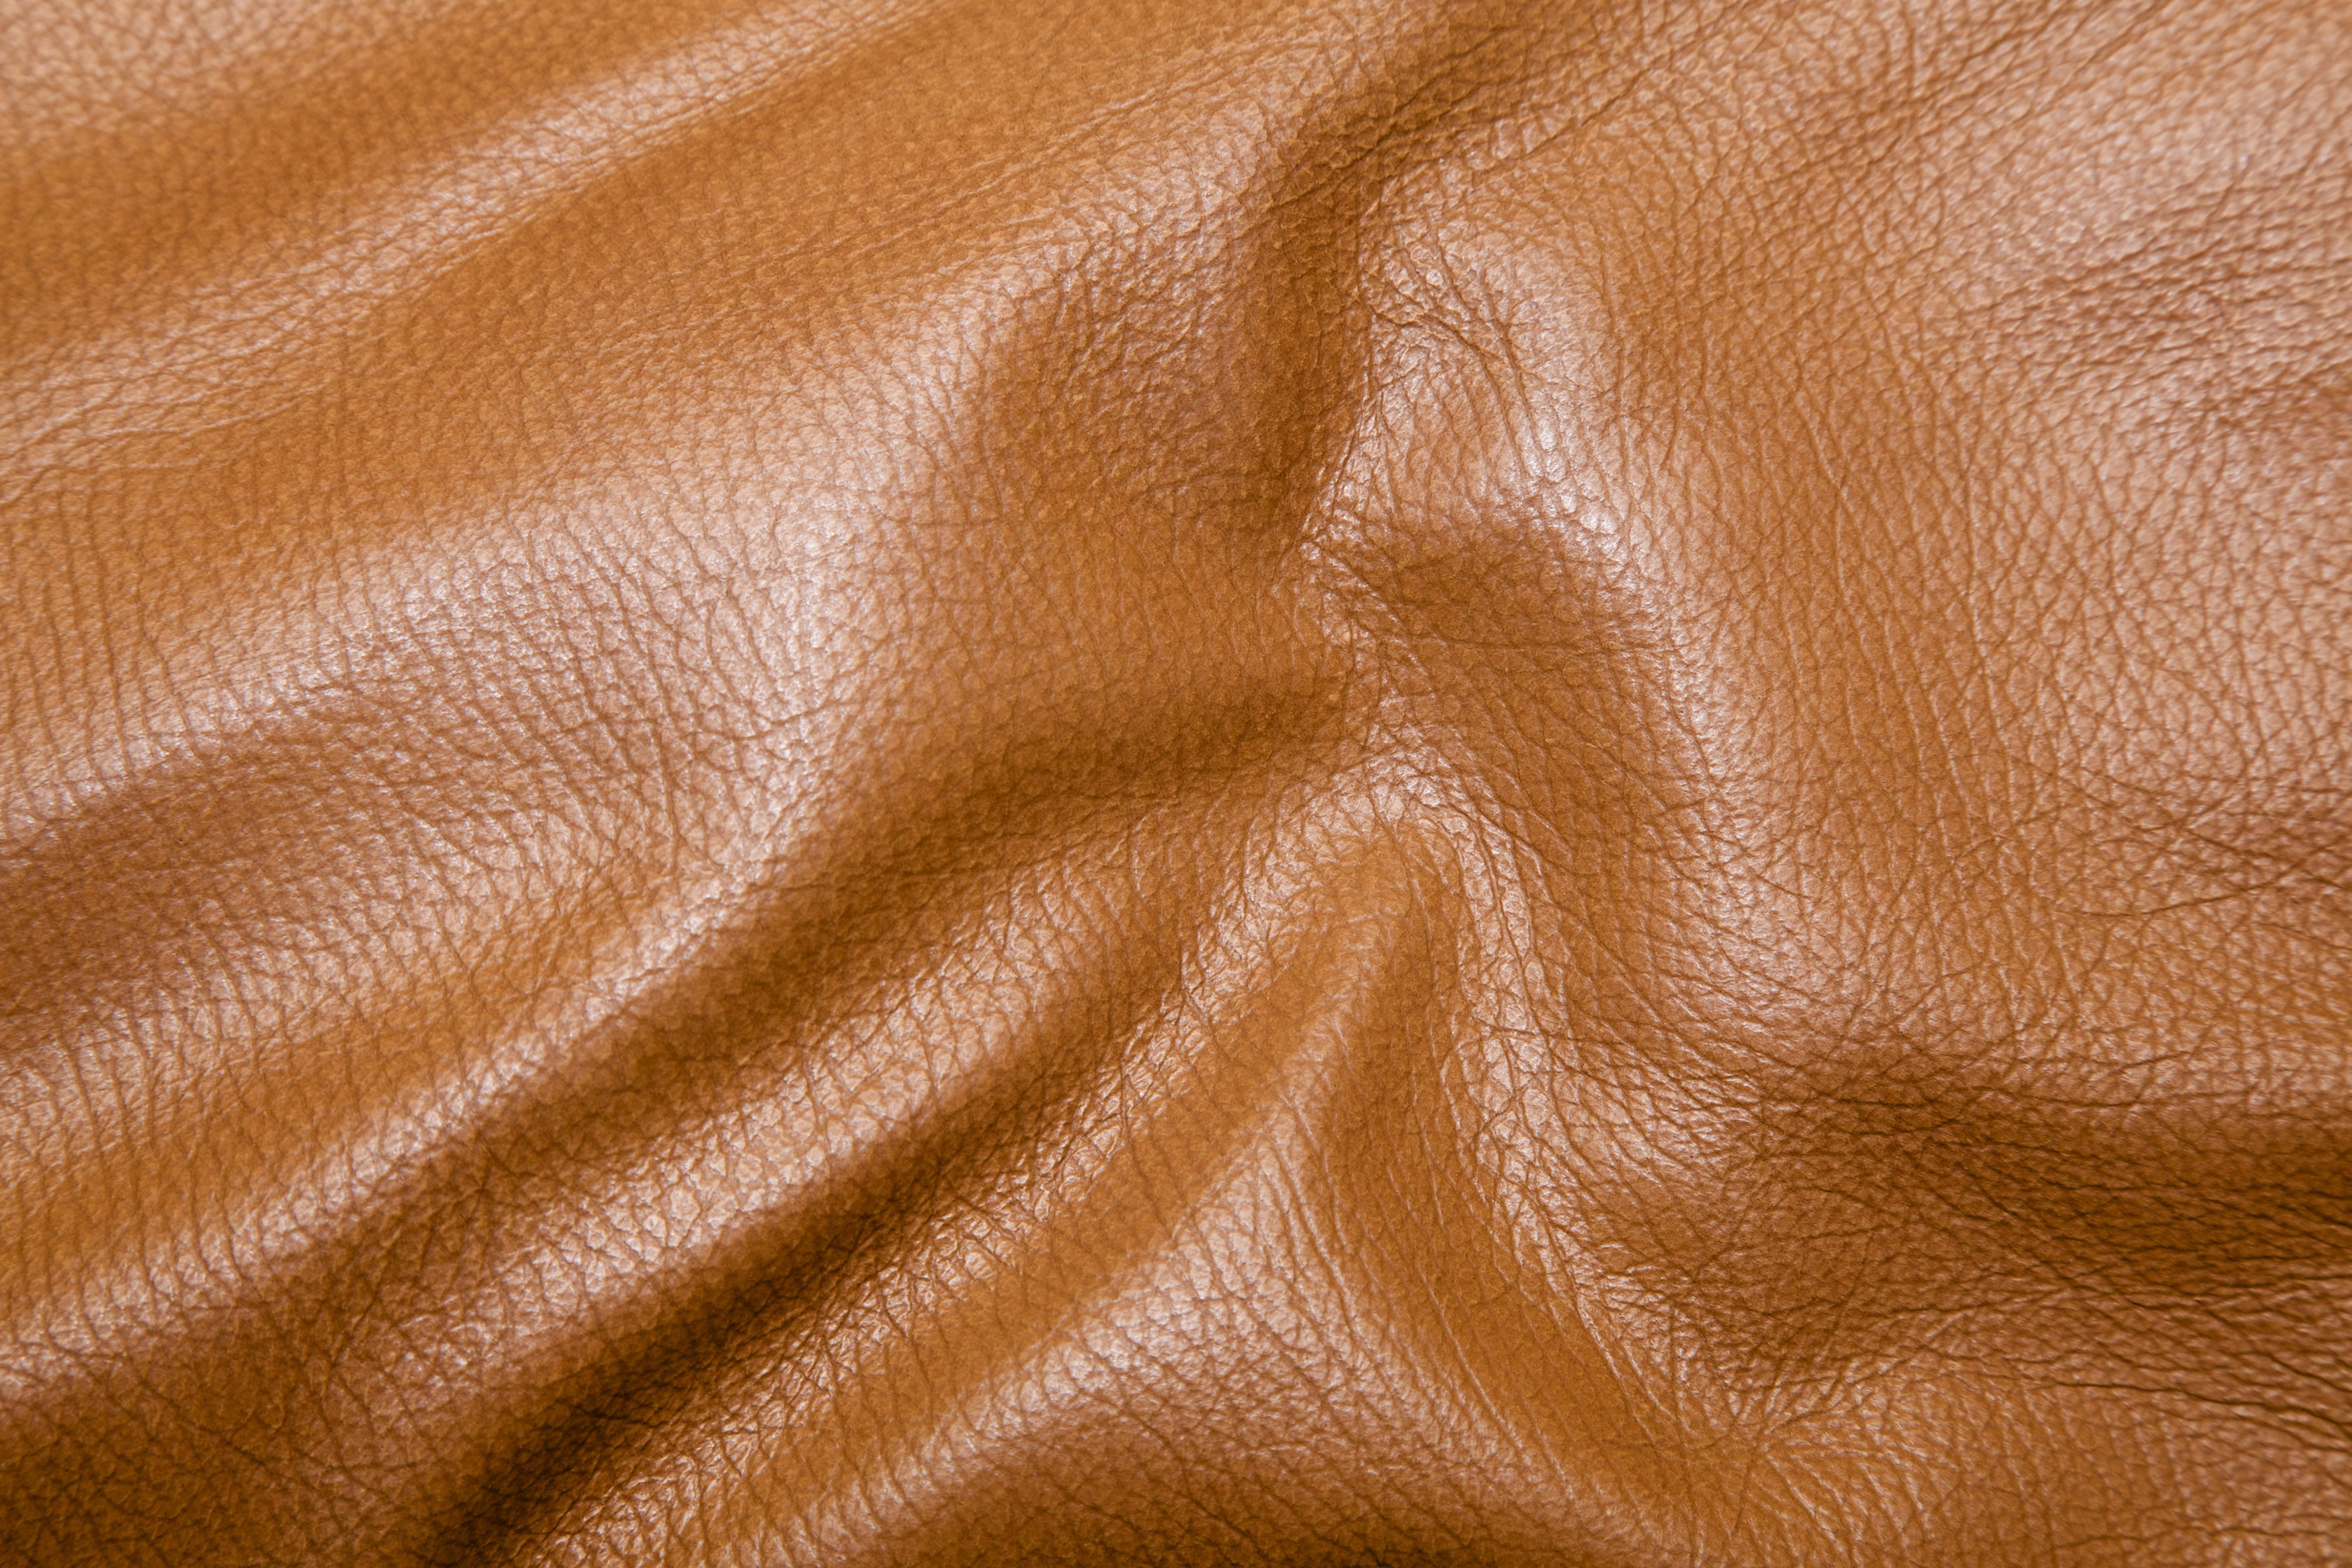 HQ Leather Wallpapers | File 1998.92Kb